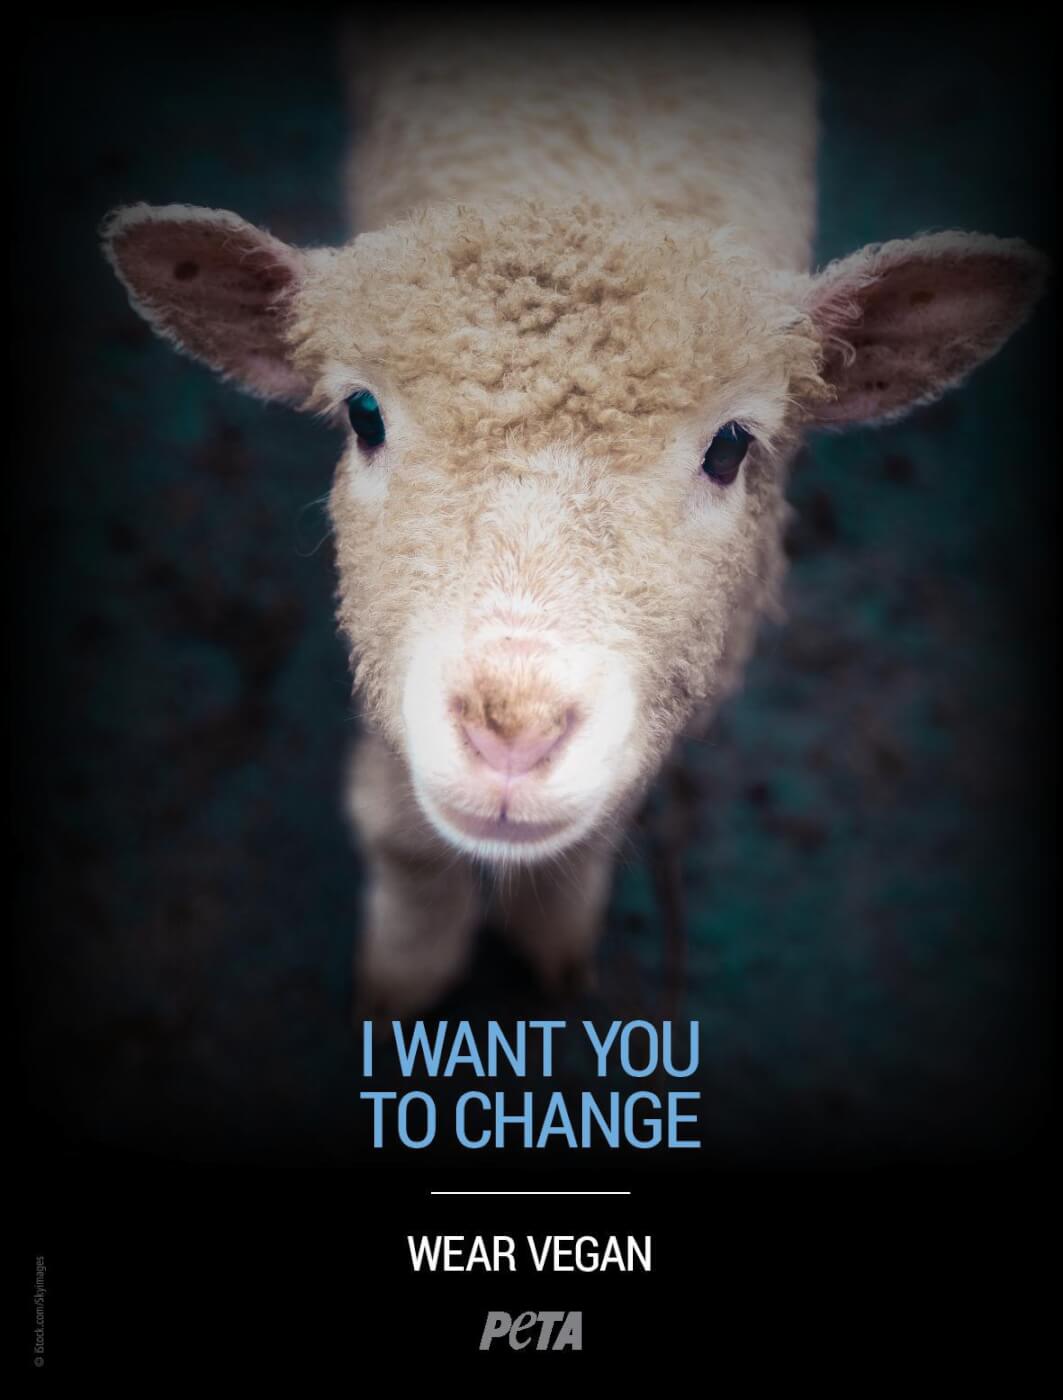 la metro free speech lawsuit from peta over rejected sheep ad